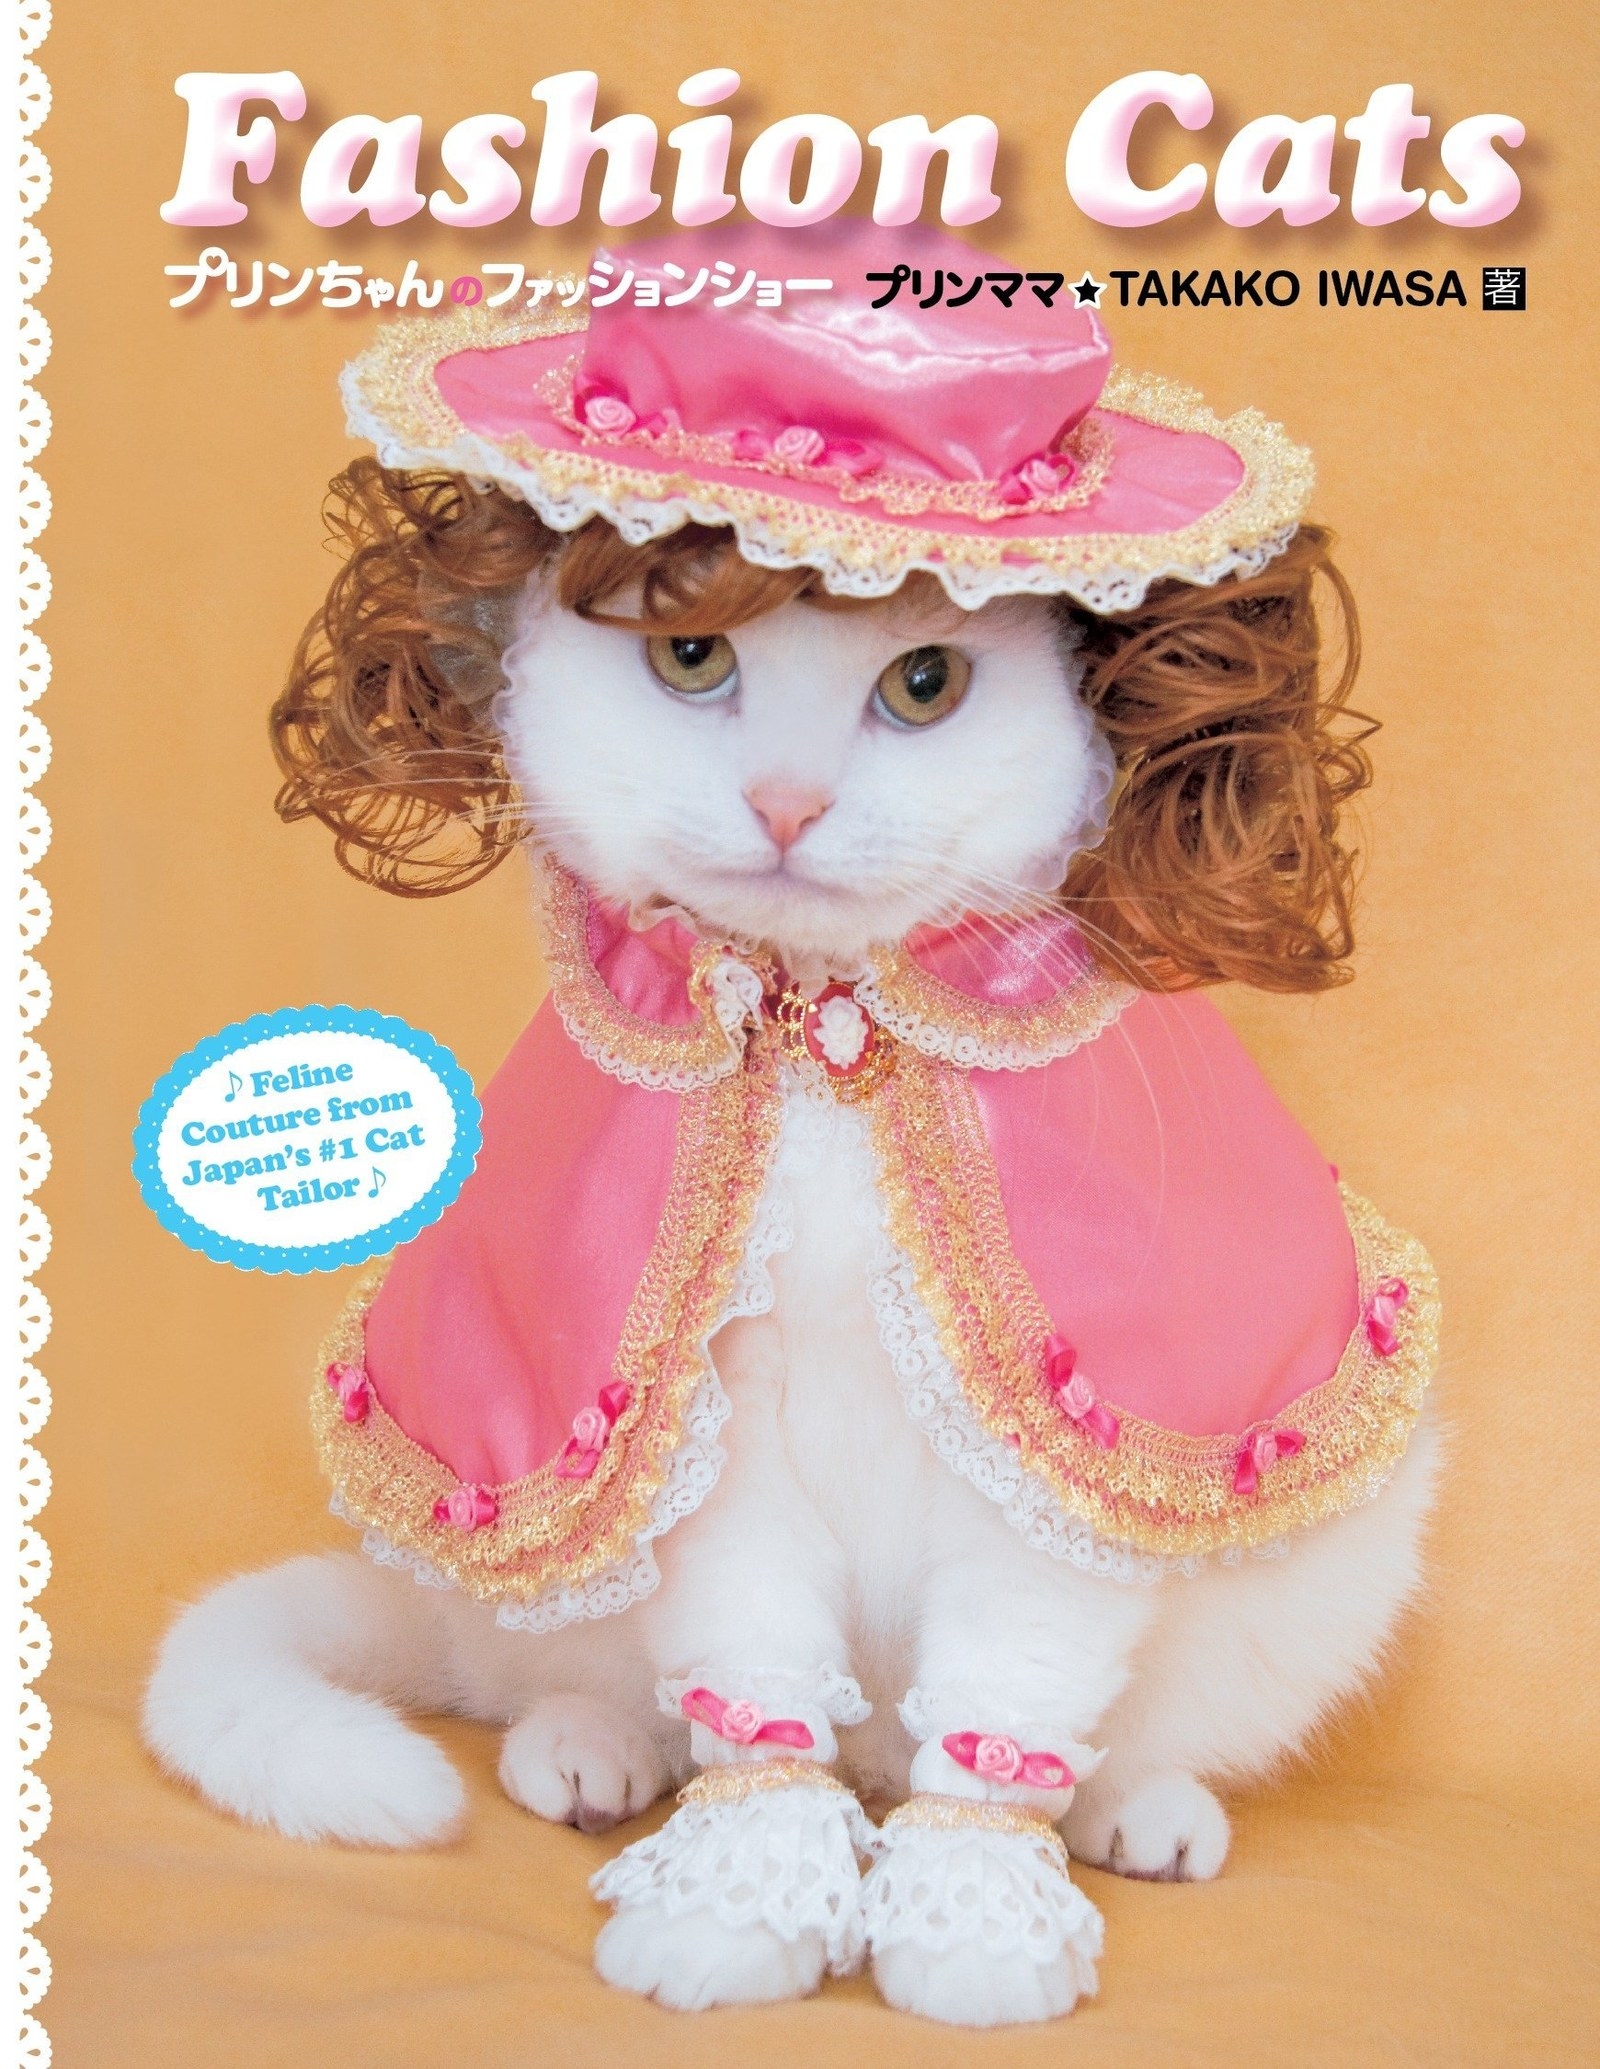 cover of book with cat in fancy clothing